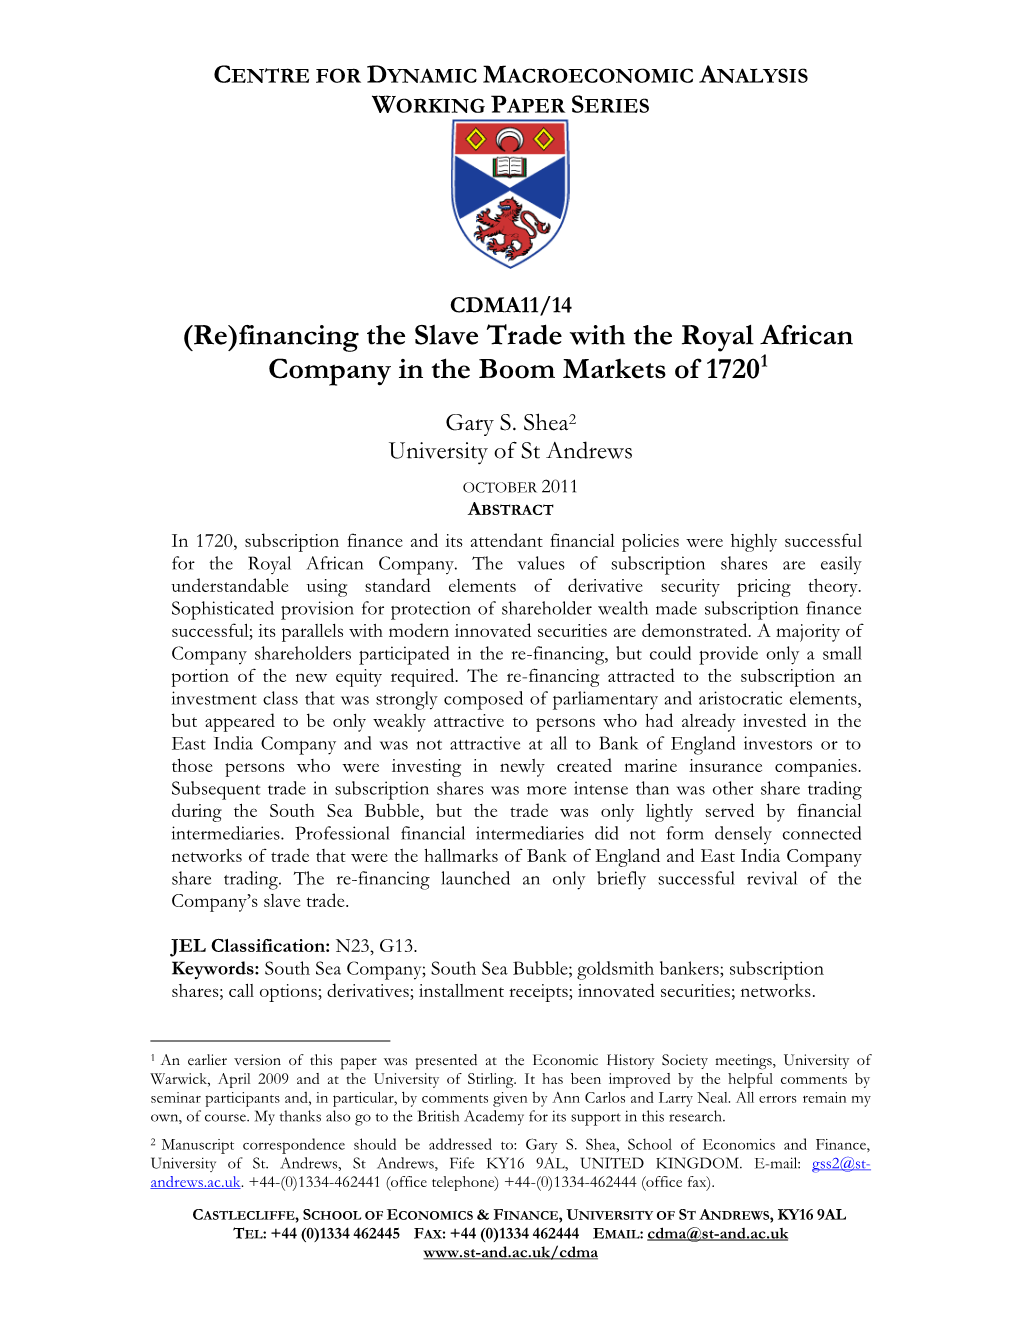 (Re)Financing the Slave Trade with the Royal African Company in the Boom Markets of 17201